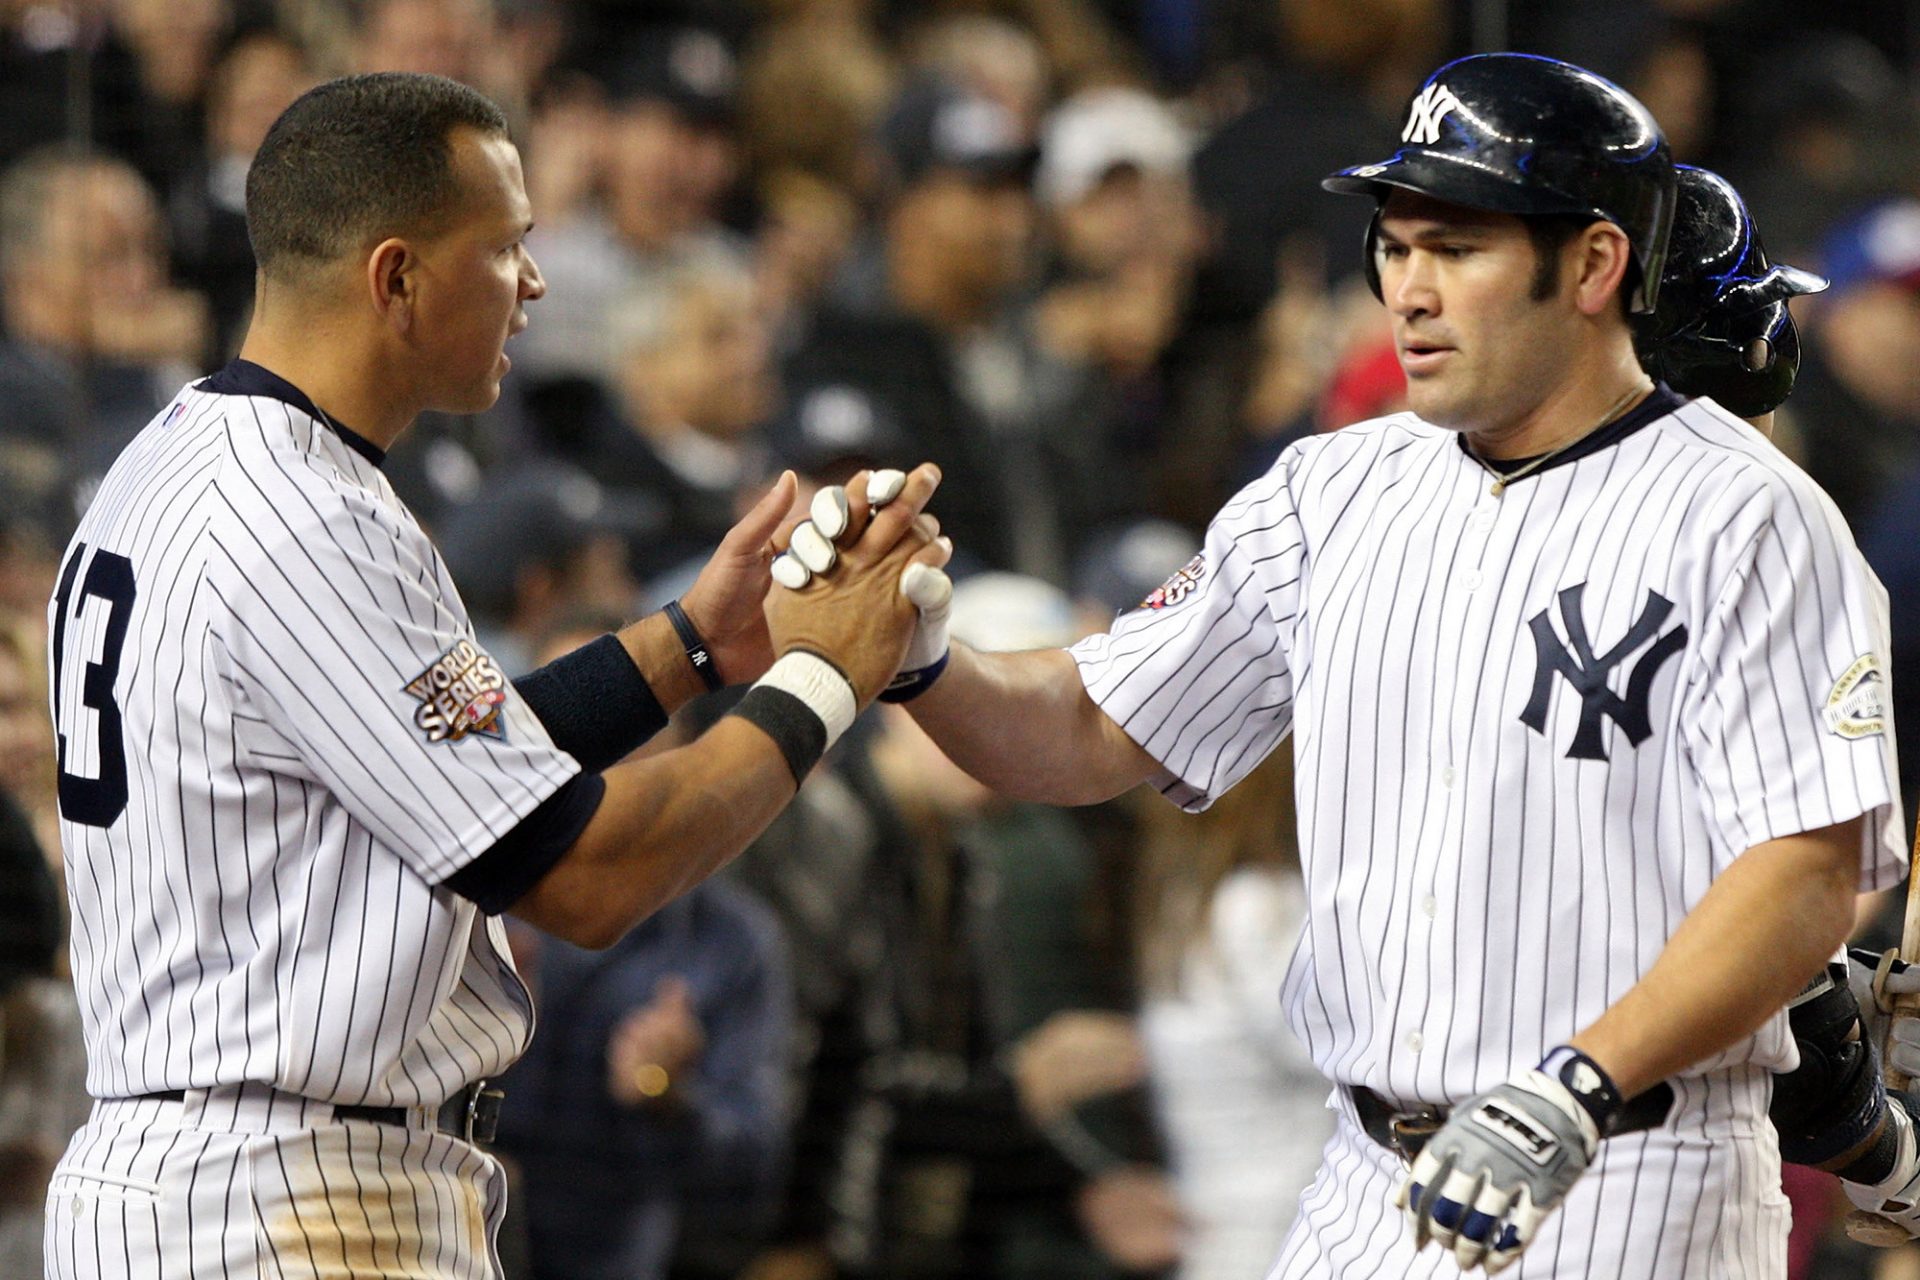 Johnny Damon on why Yankees didn’t retract again after 2009: ‘I wasn’t there’